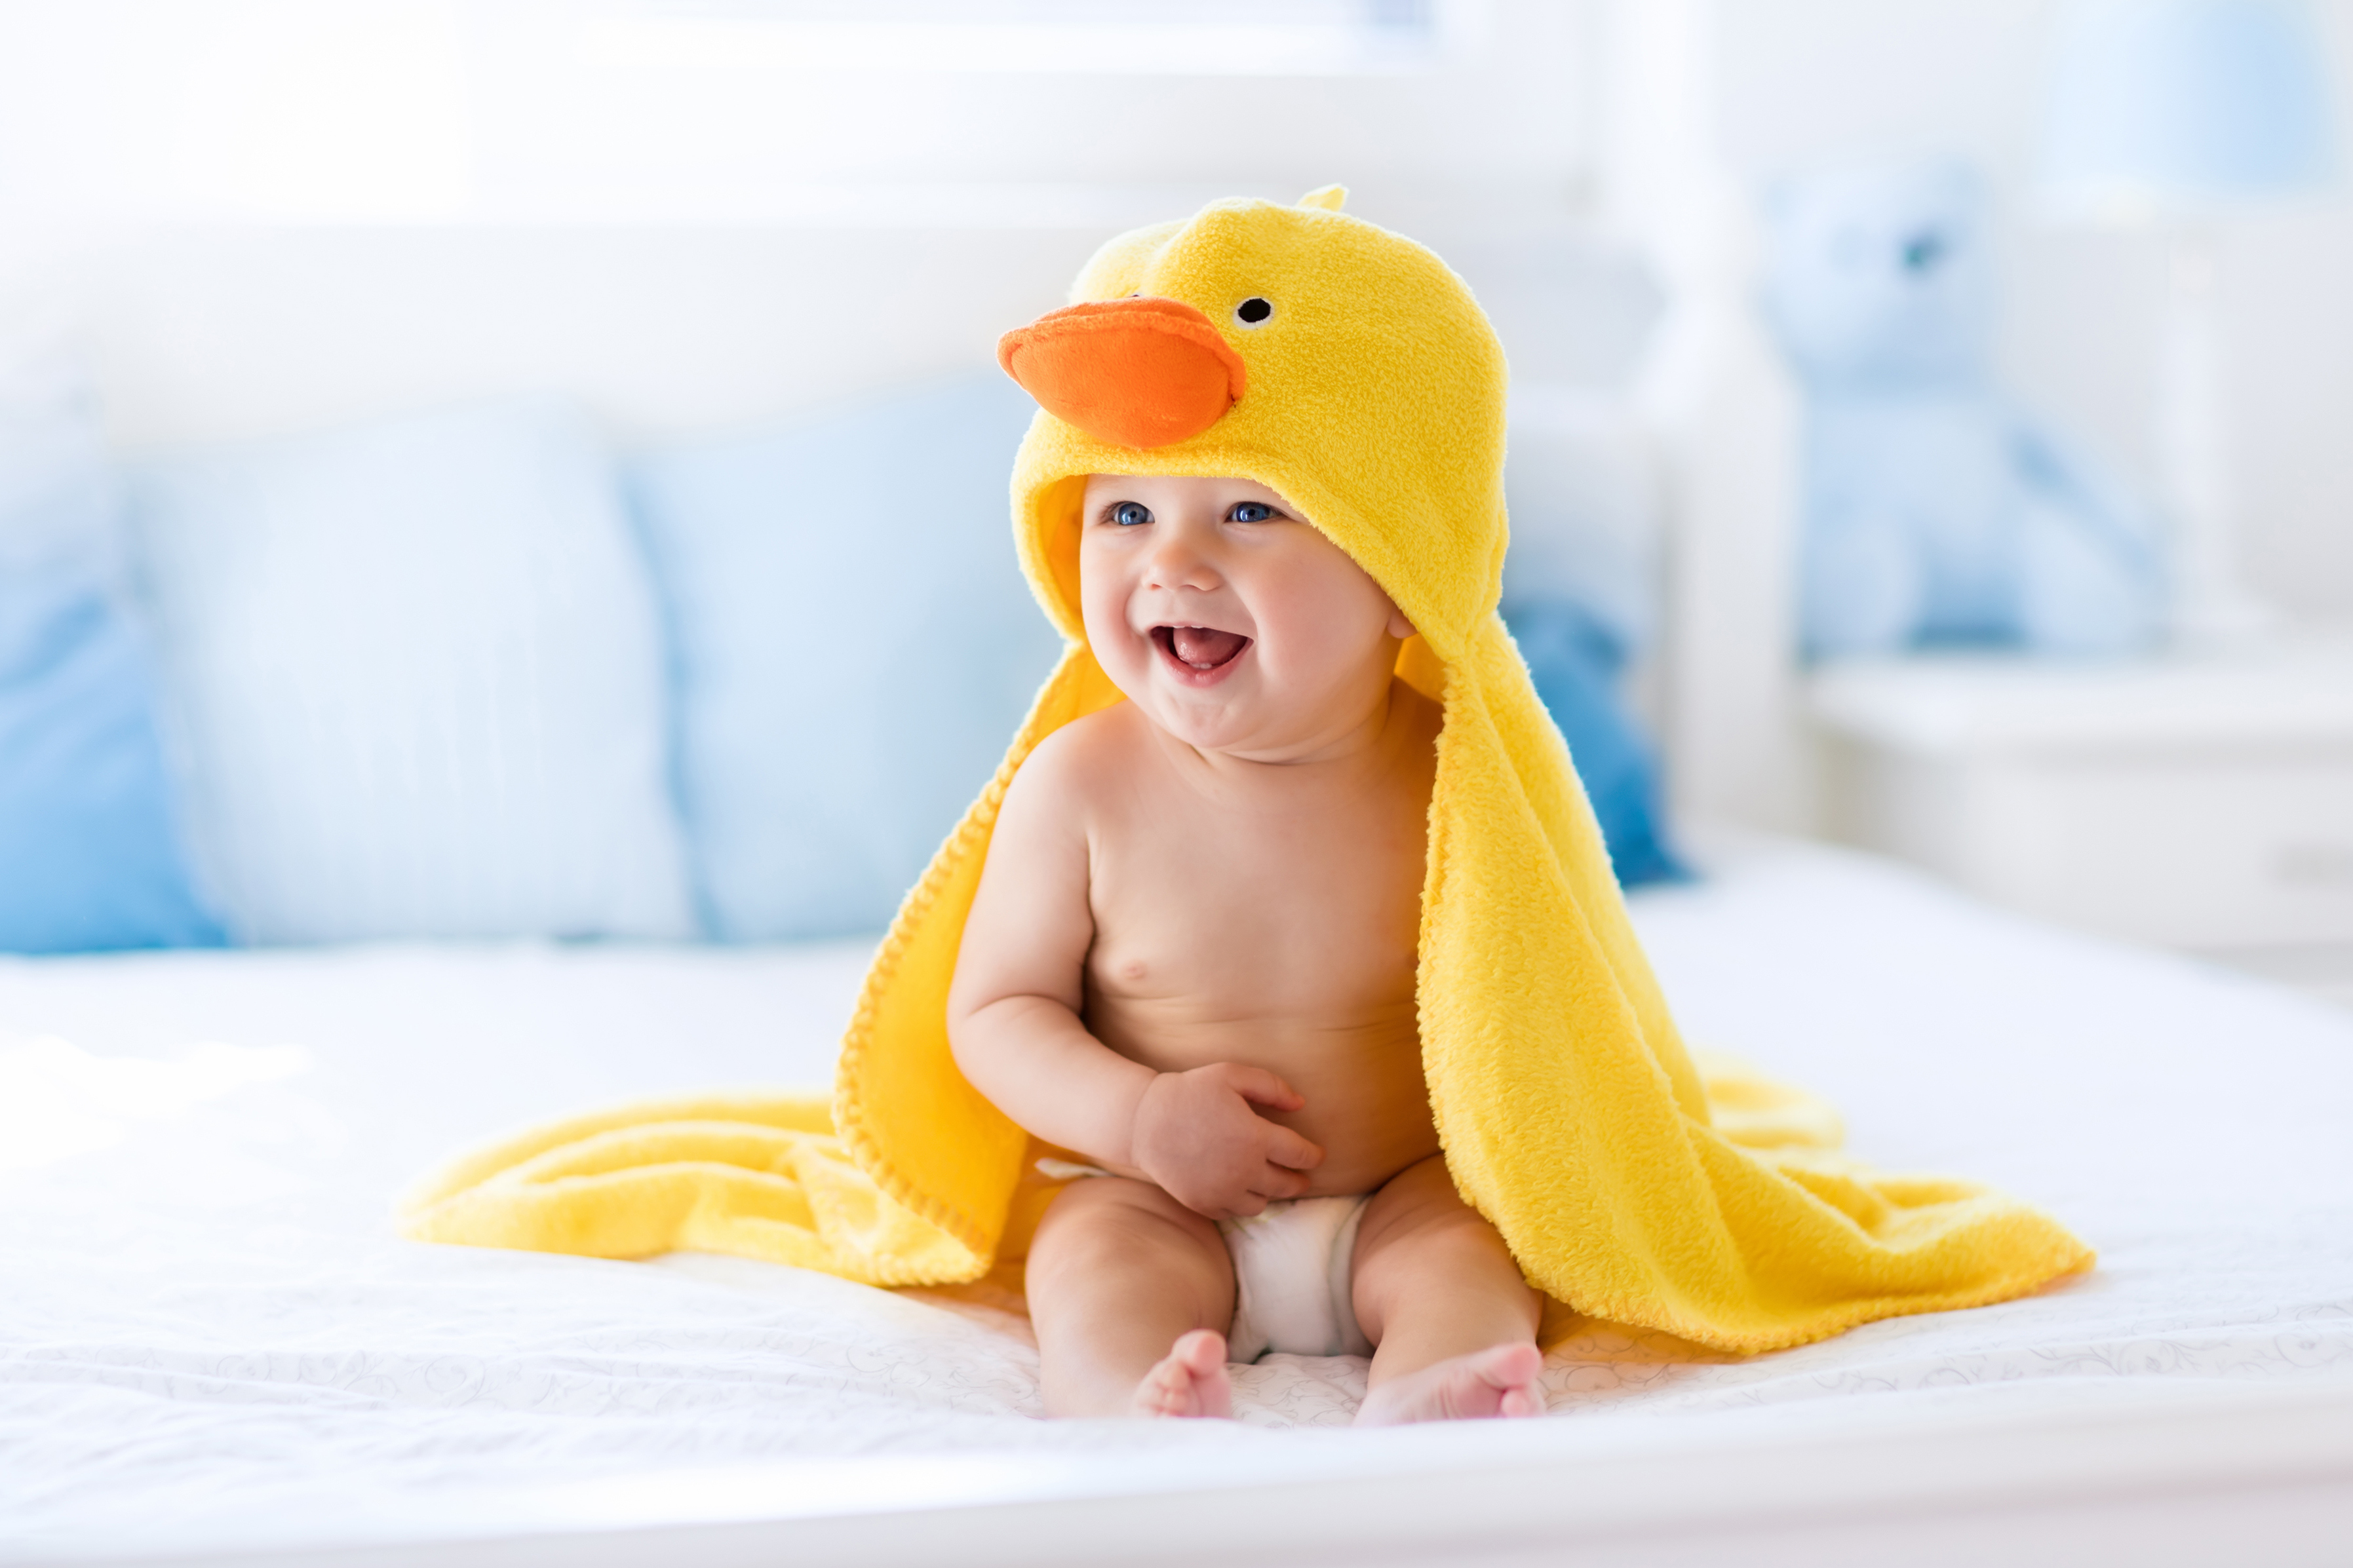 Smiling baby sitting on bed wearing duck costume